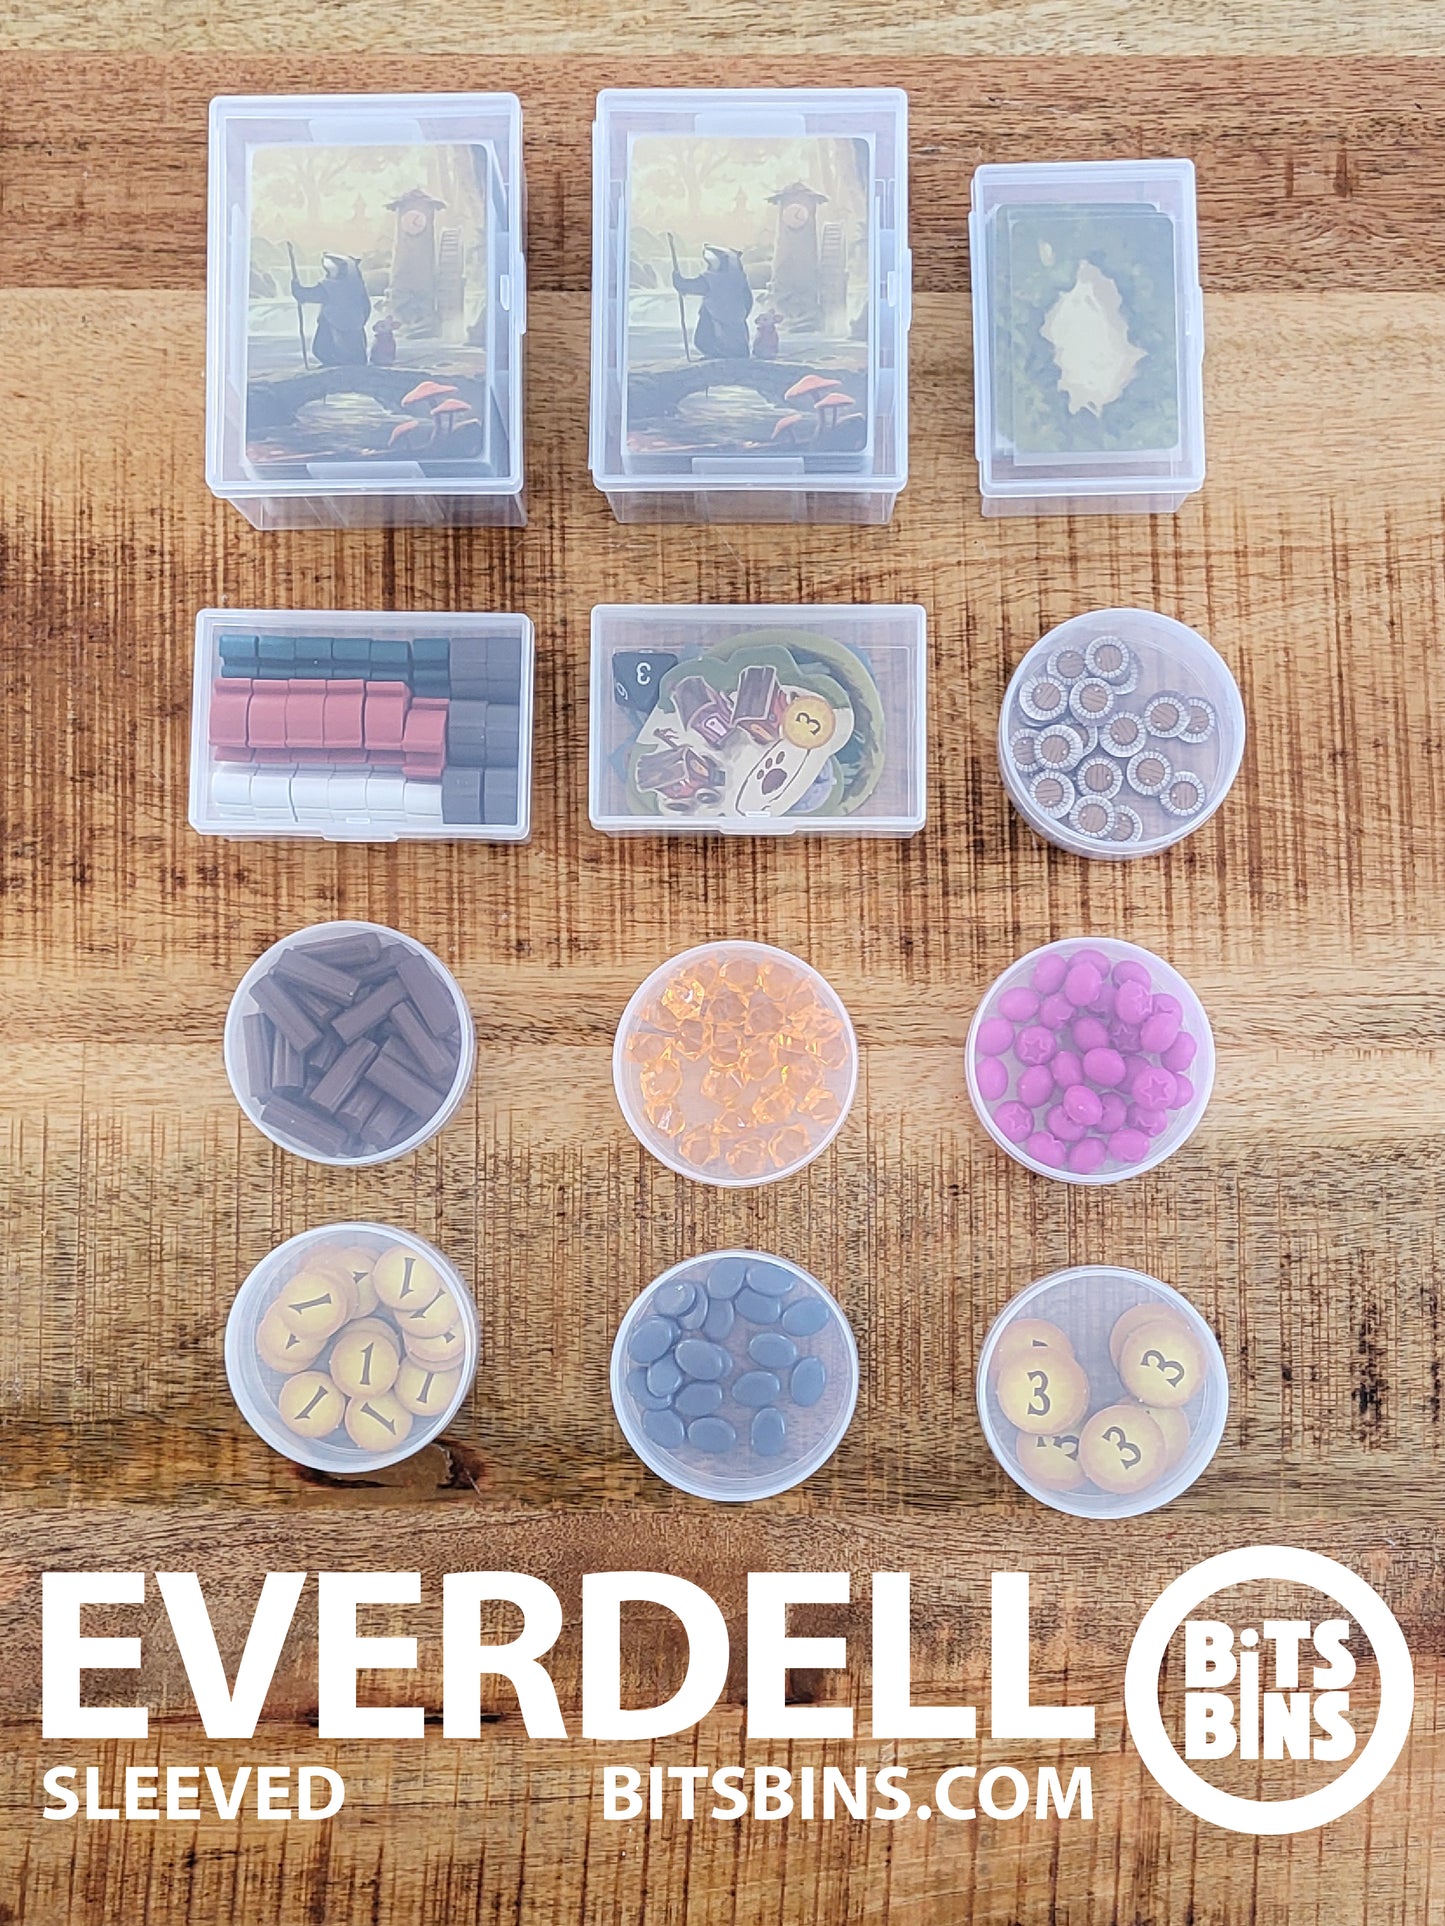 RECOMMENDED Bitsbins Everdell (sleeved) - 7 Pods, 3 XLs, 2 100+ Card Boxes